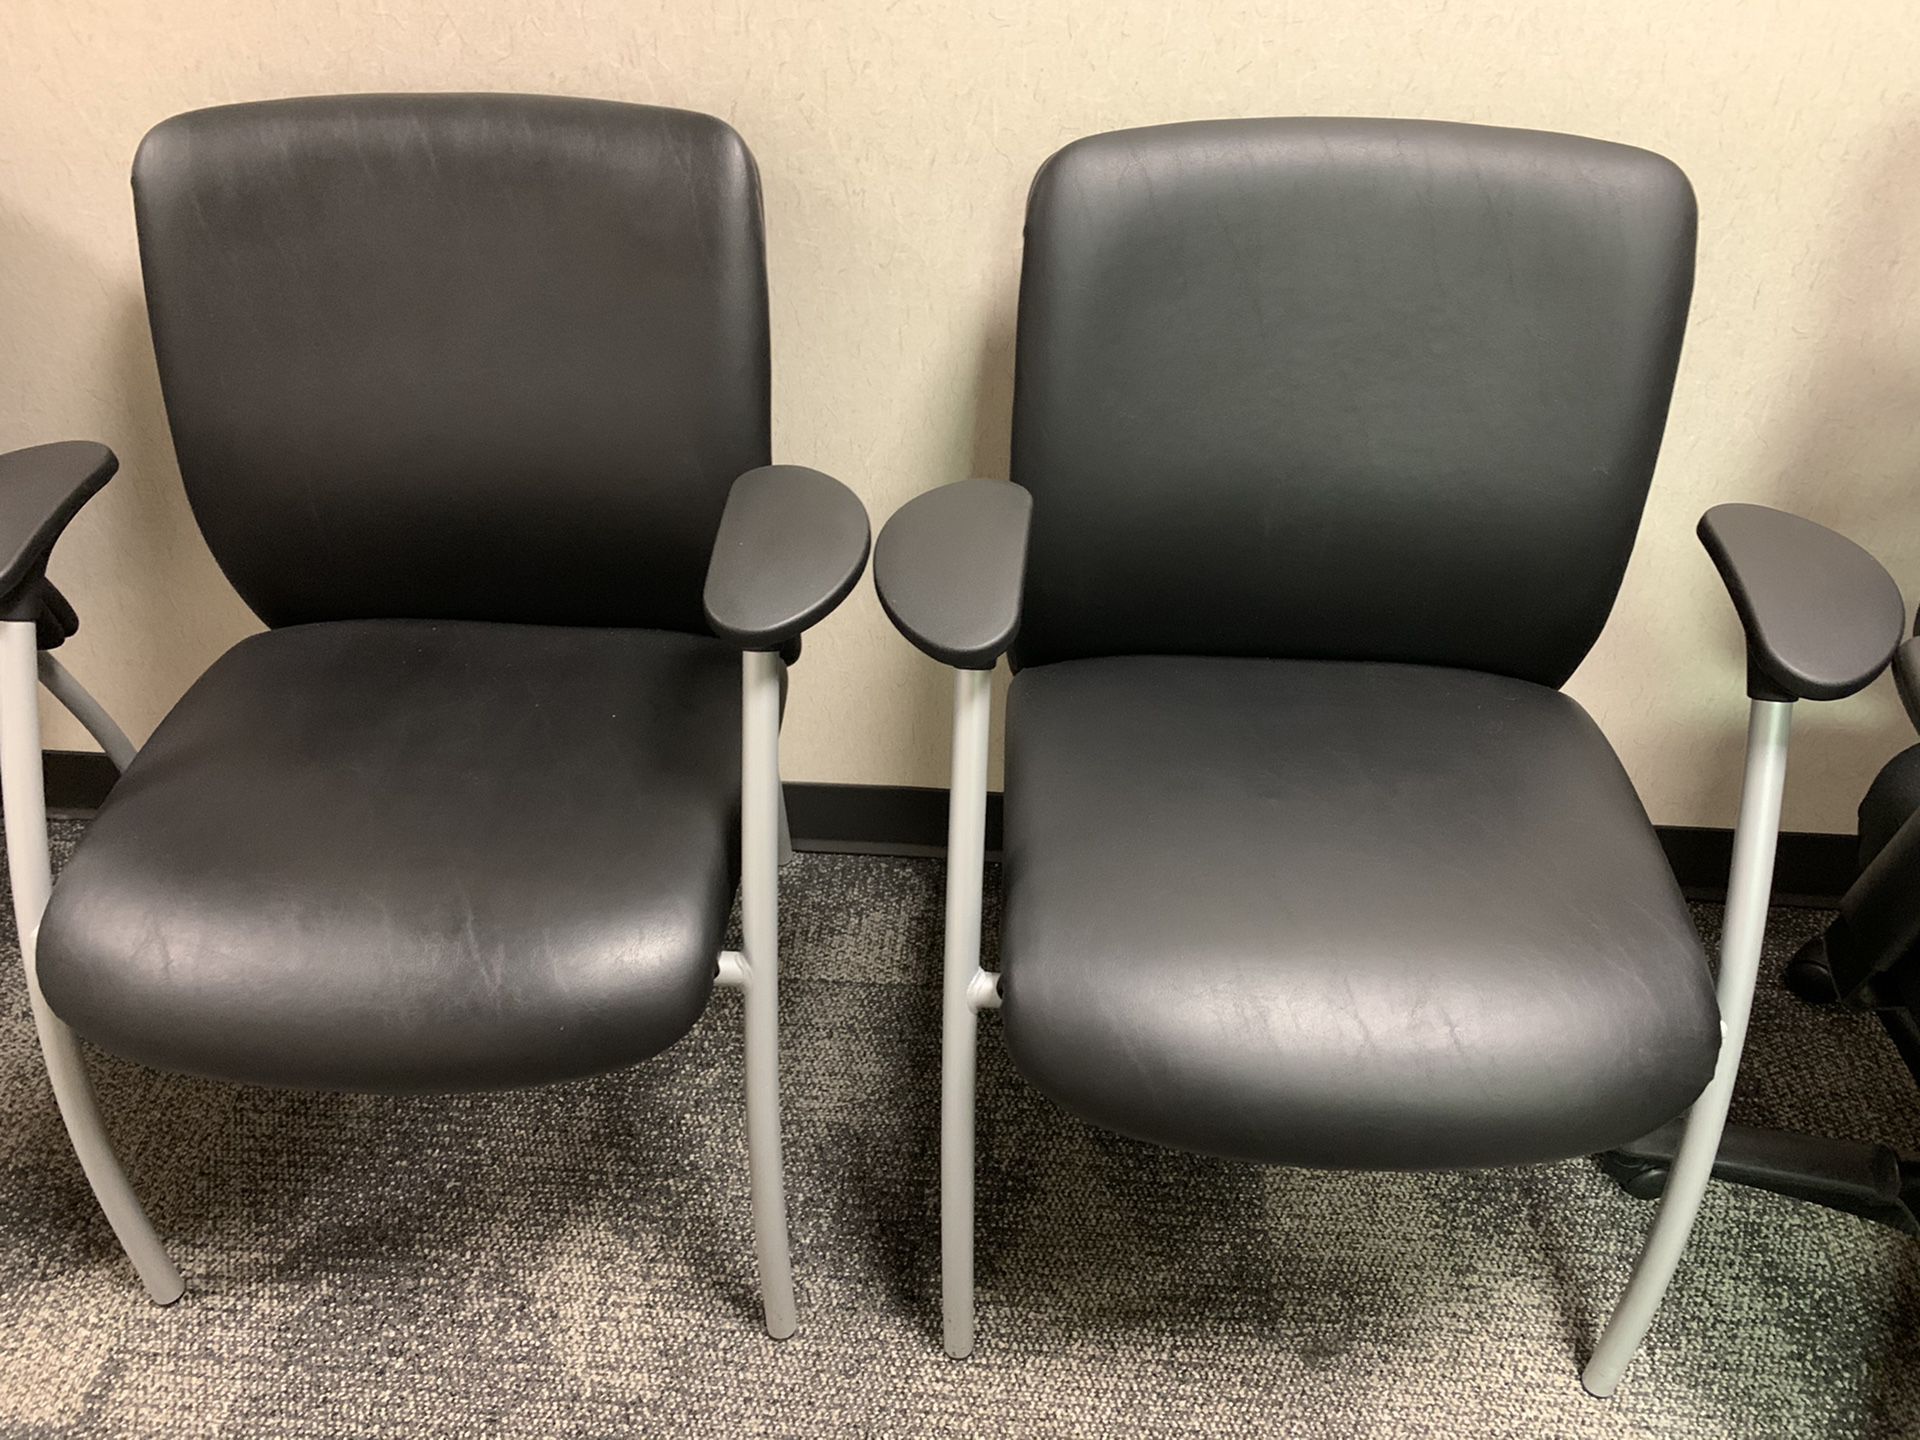 Chairs and office desk for sale